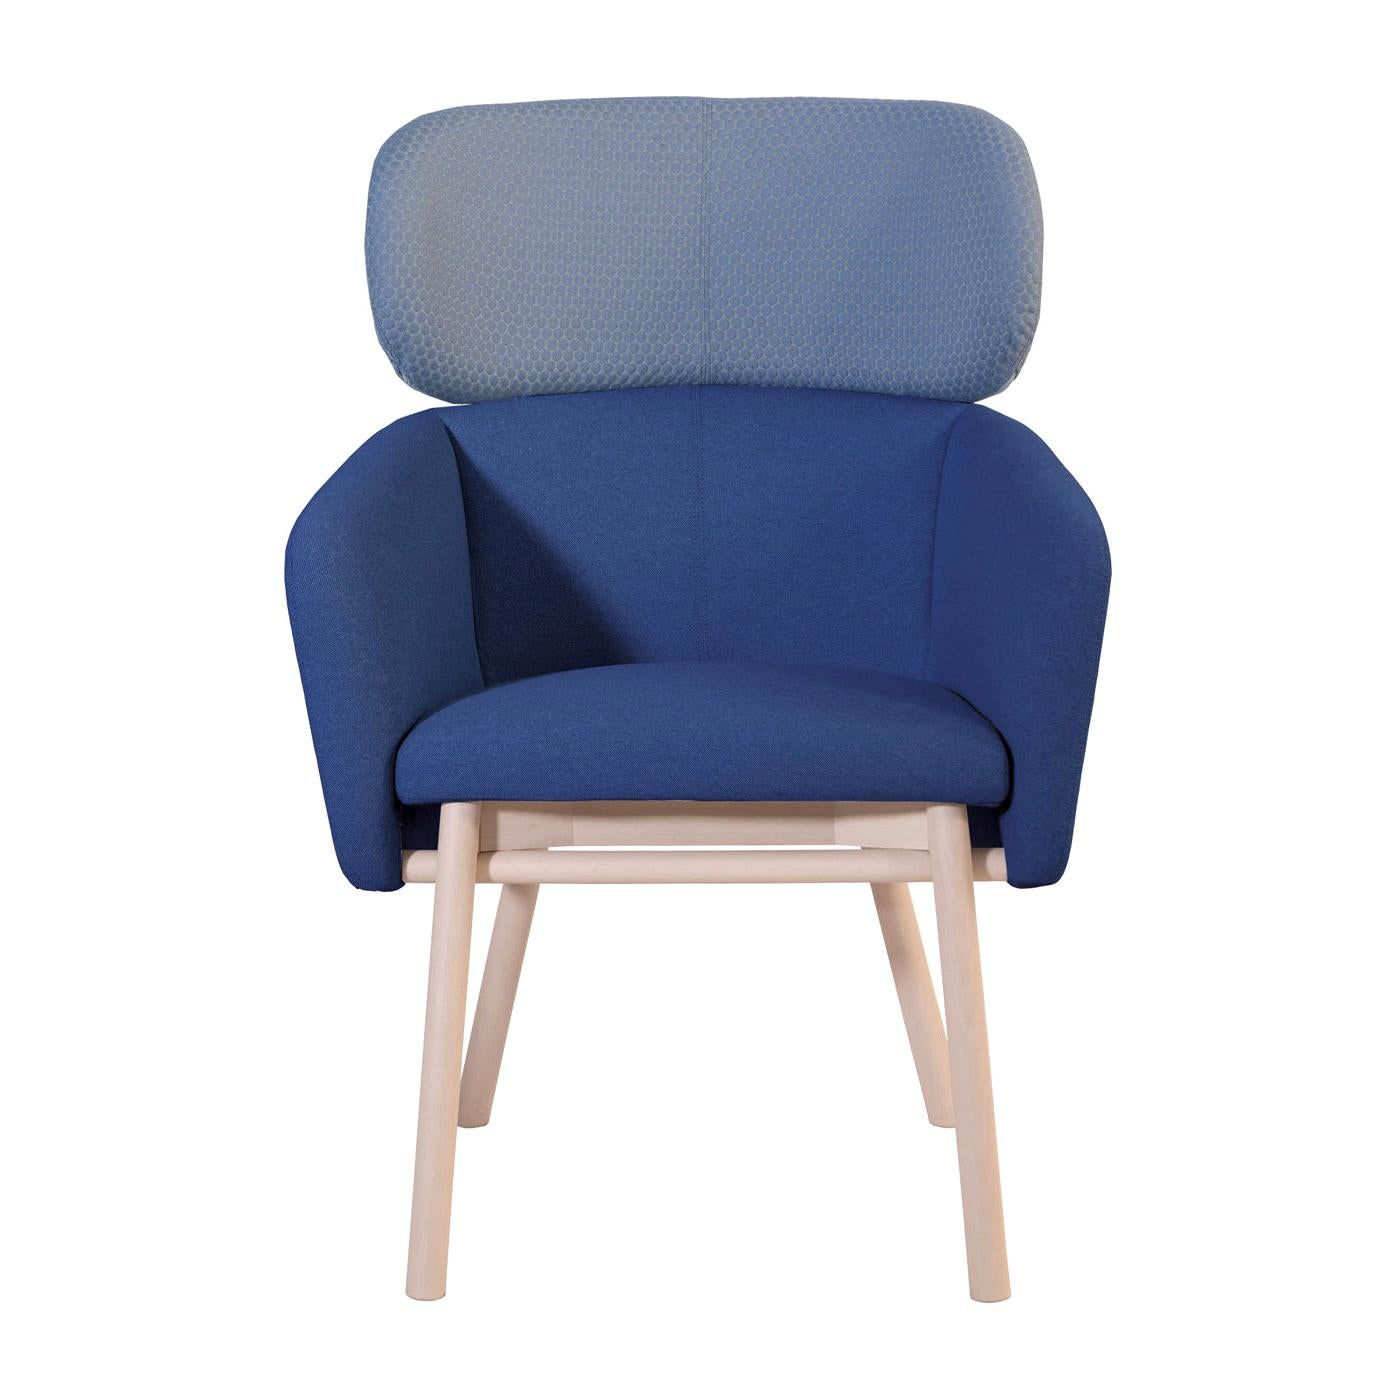 Balù Extra Large Blue and Lightblue Chair by Emilio Nanni For Sale